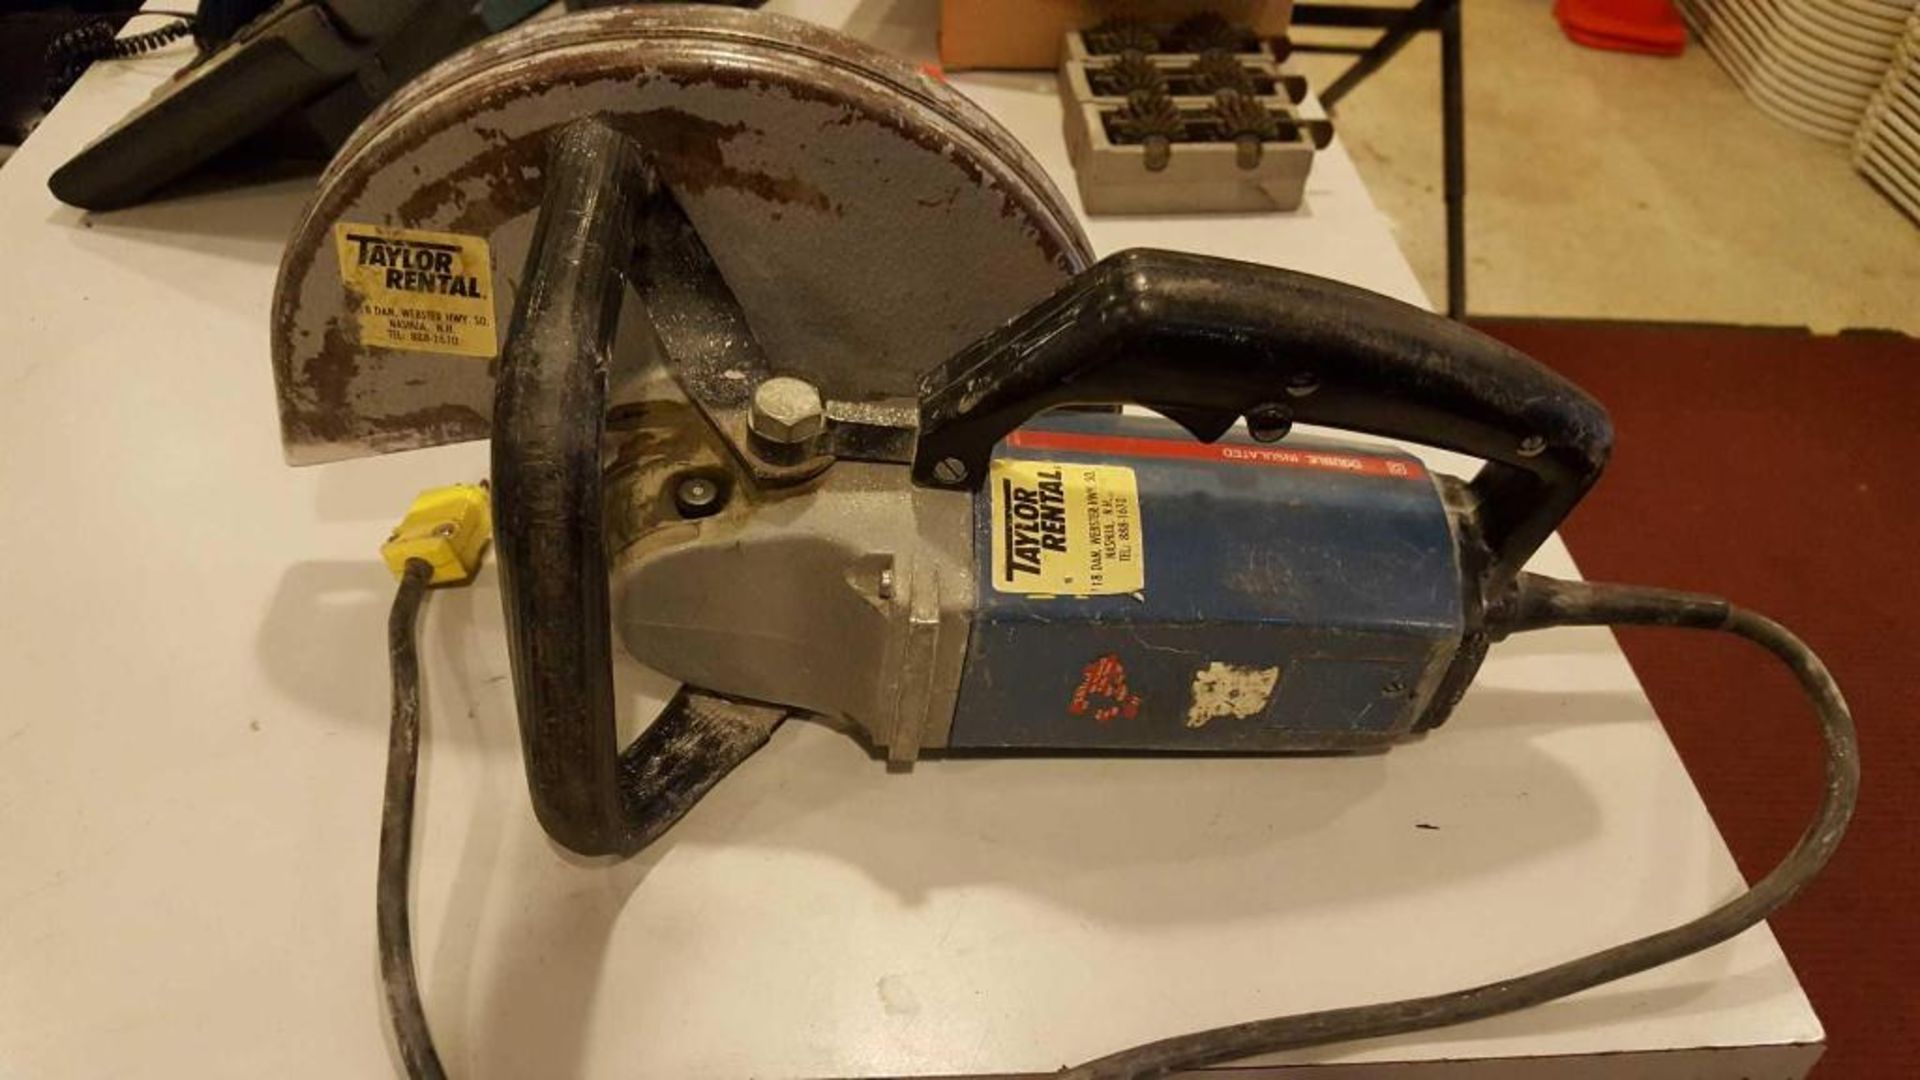 Bosch Electric chop saw, model 0601, with case - Image 2 of 3